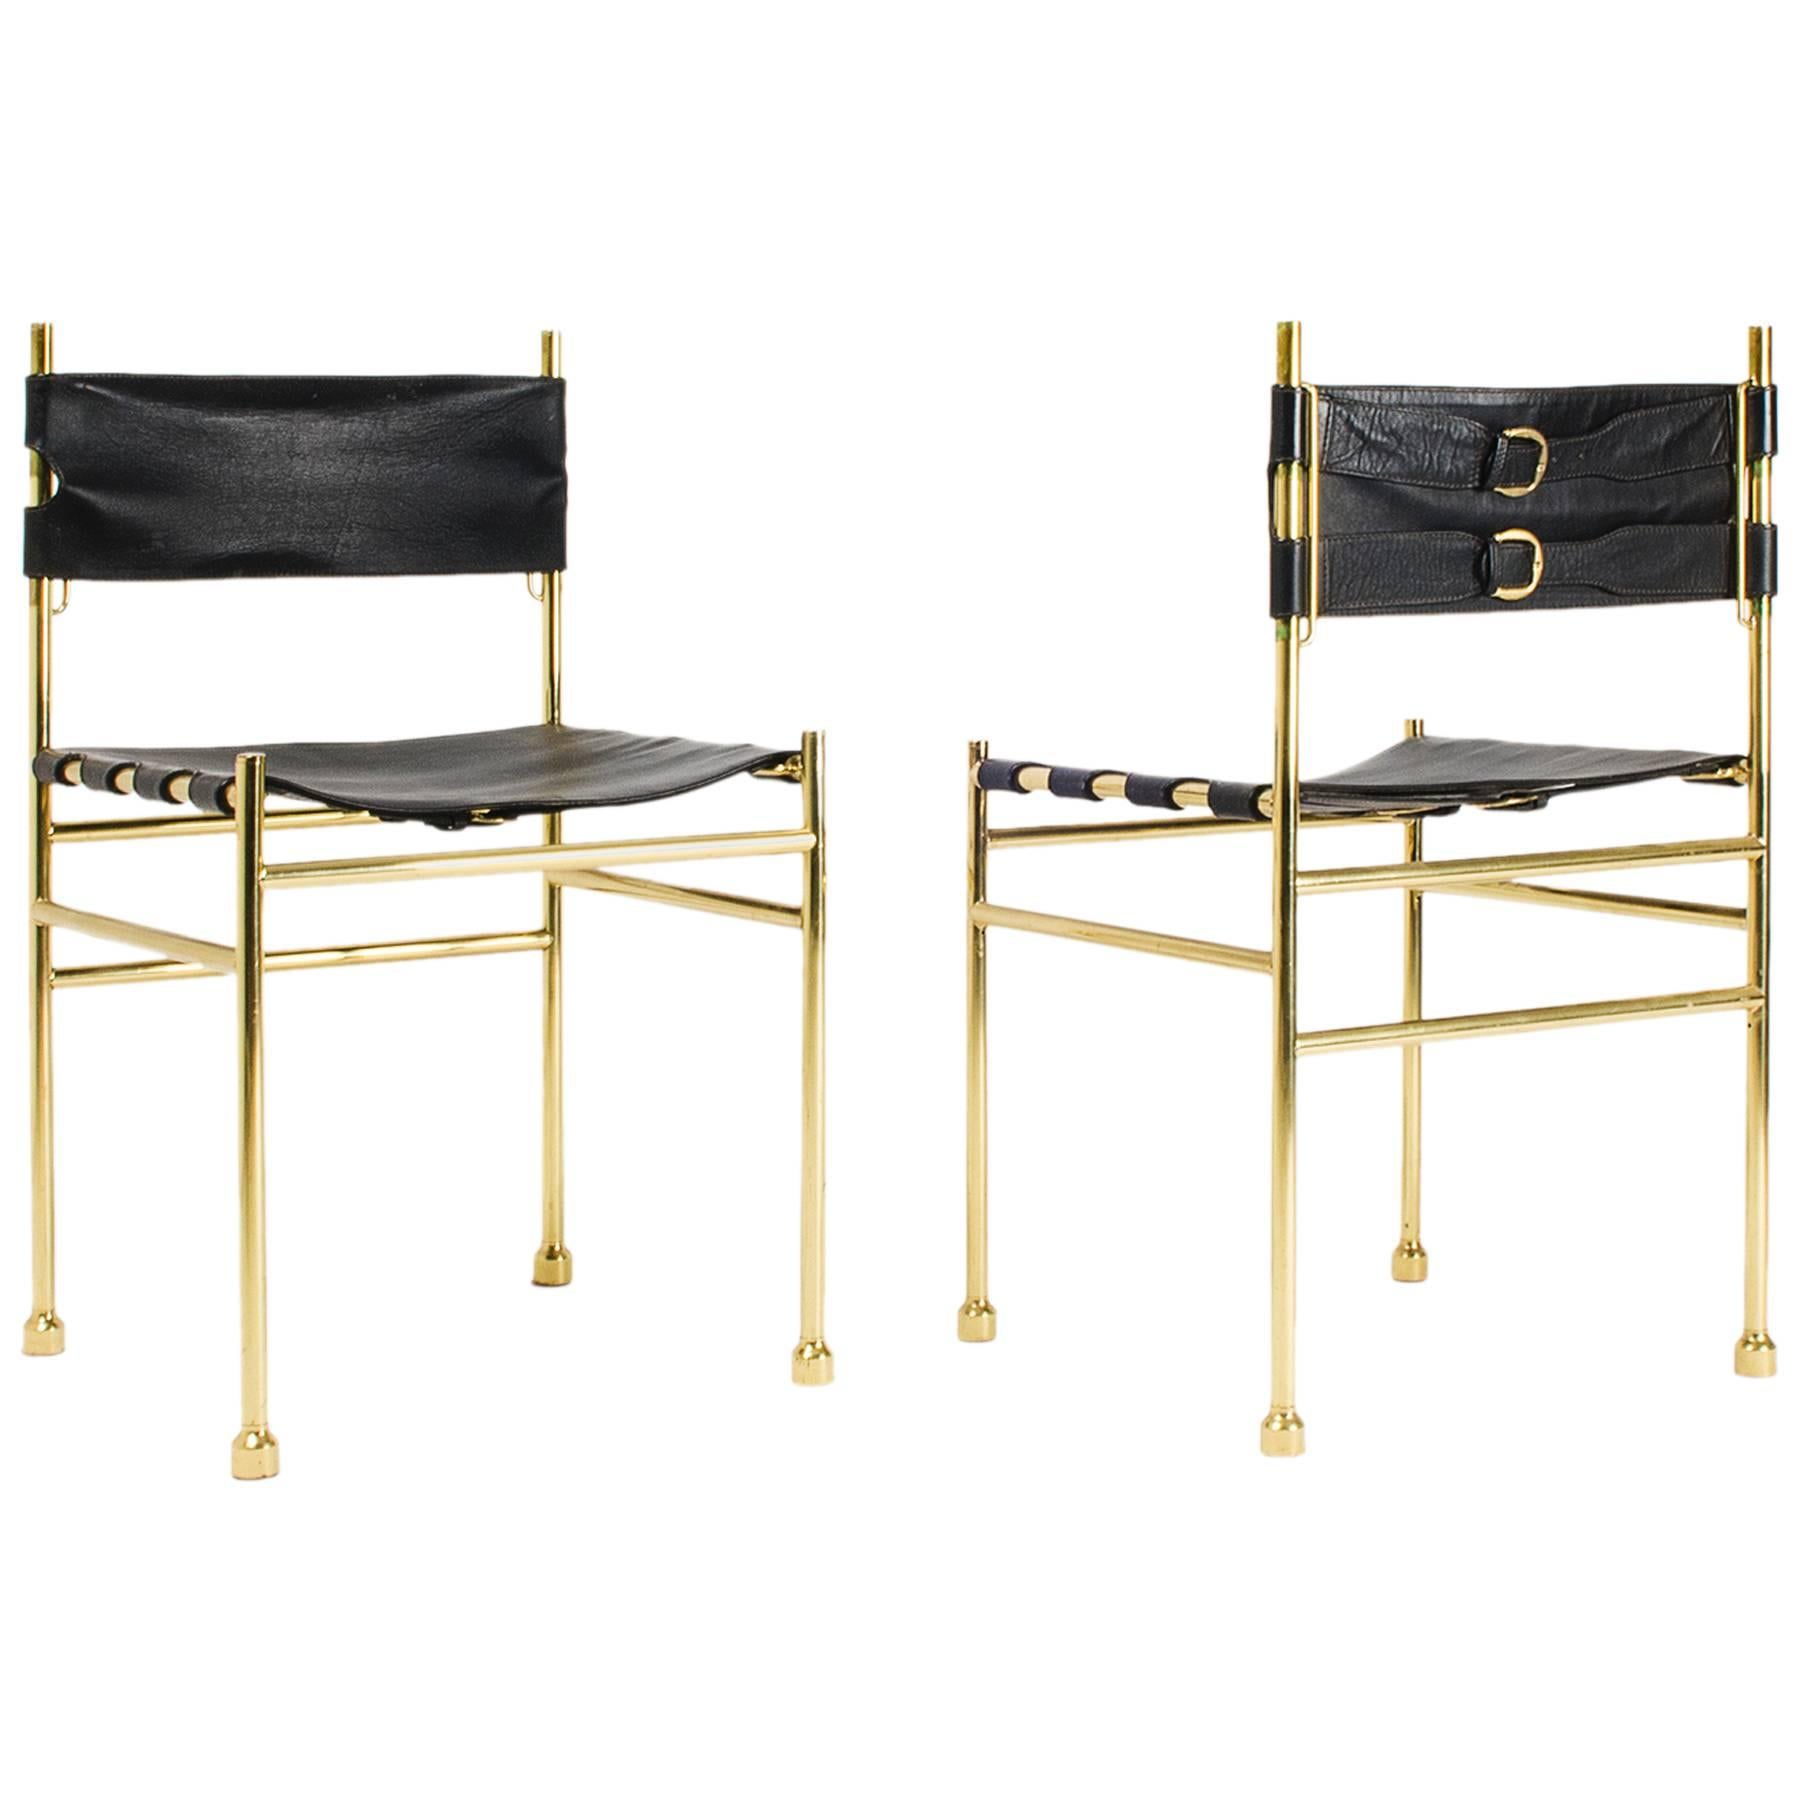 "Brown" Pair of Brass and Leather Chairs by Aldo Frigerio